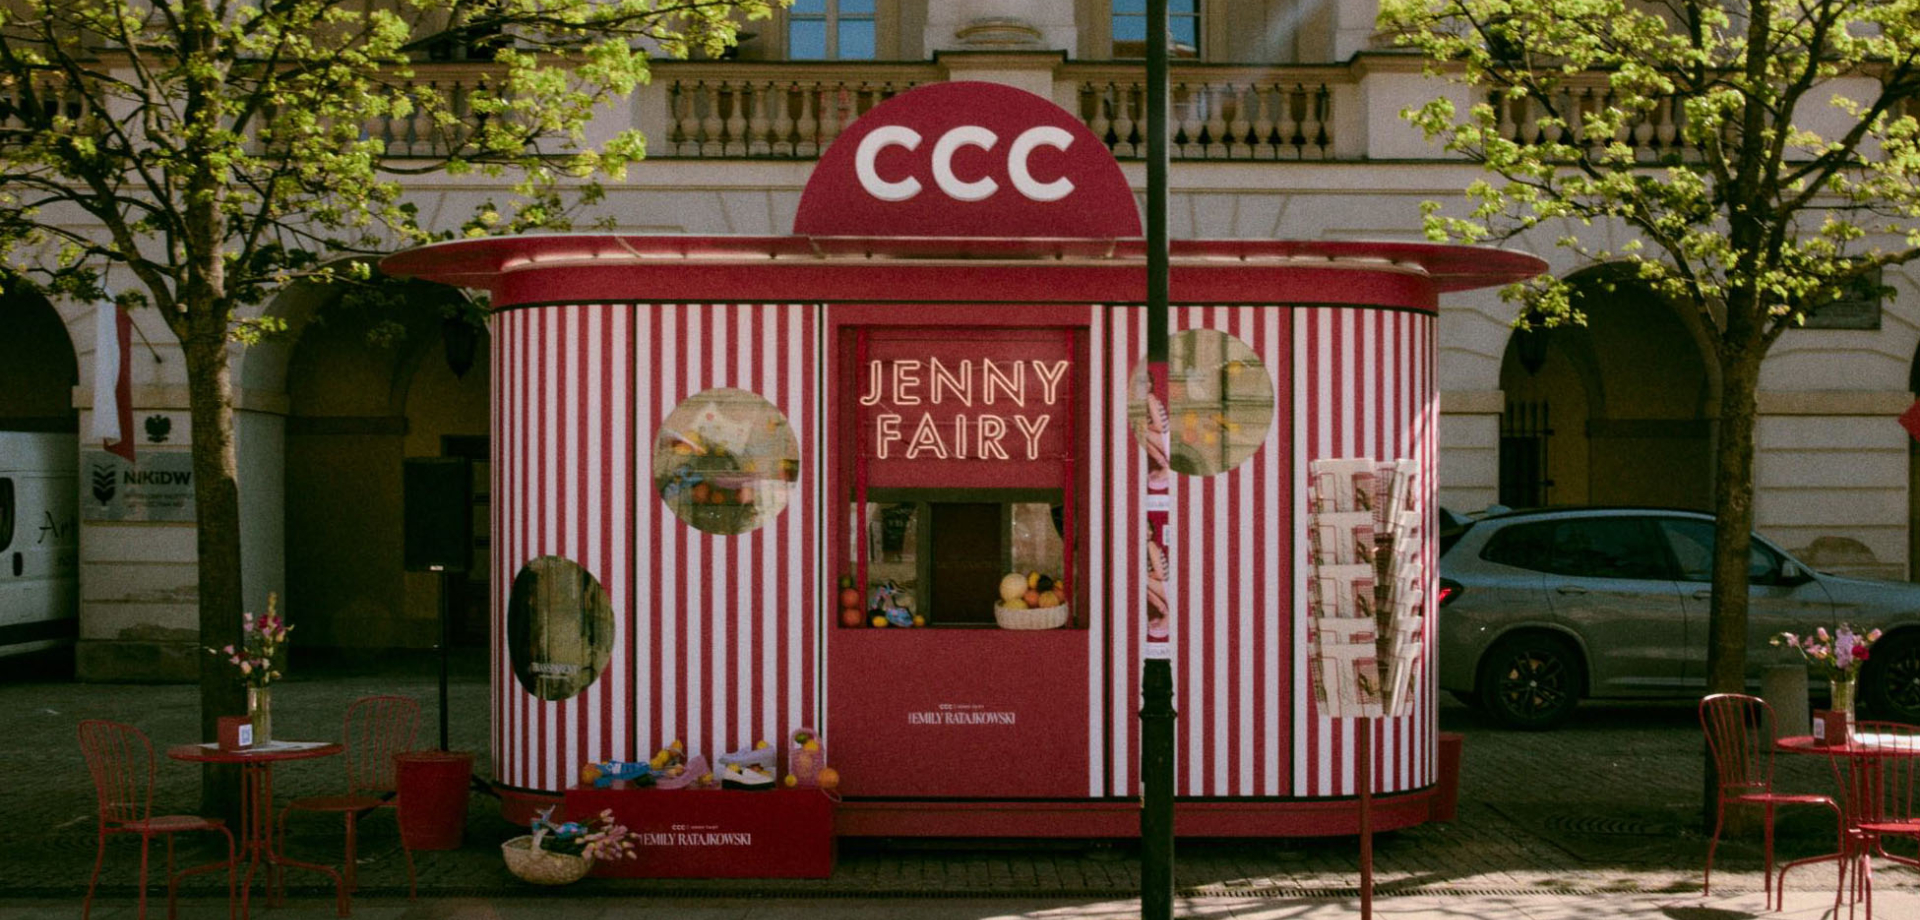 Sunny Riviera in Warsaw. Jenny Fairy French kiosk attracts crowds